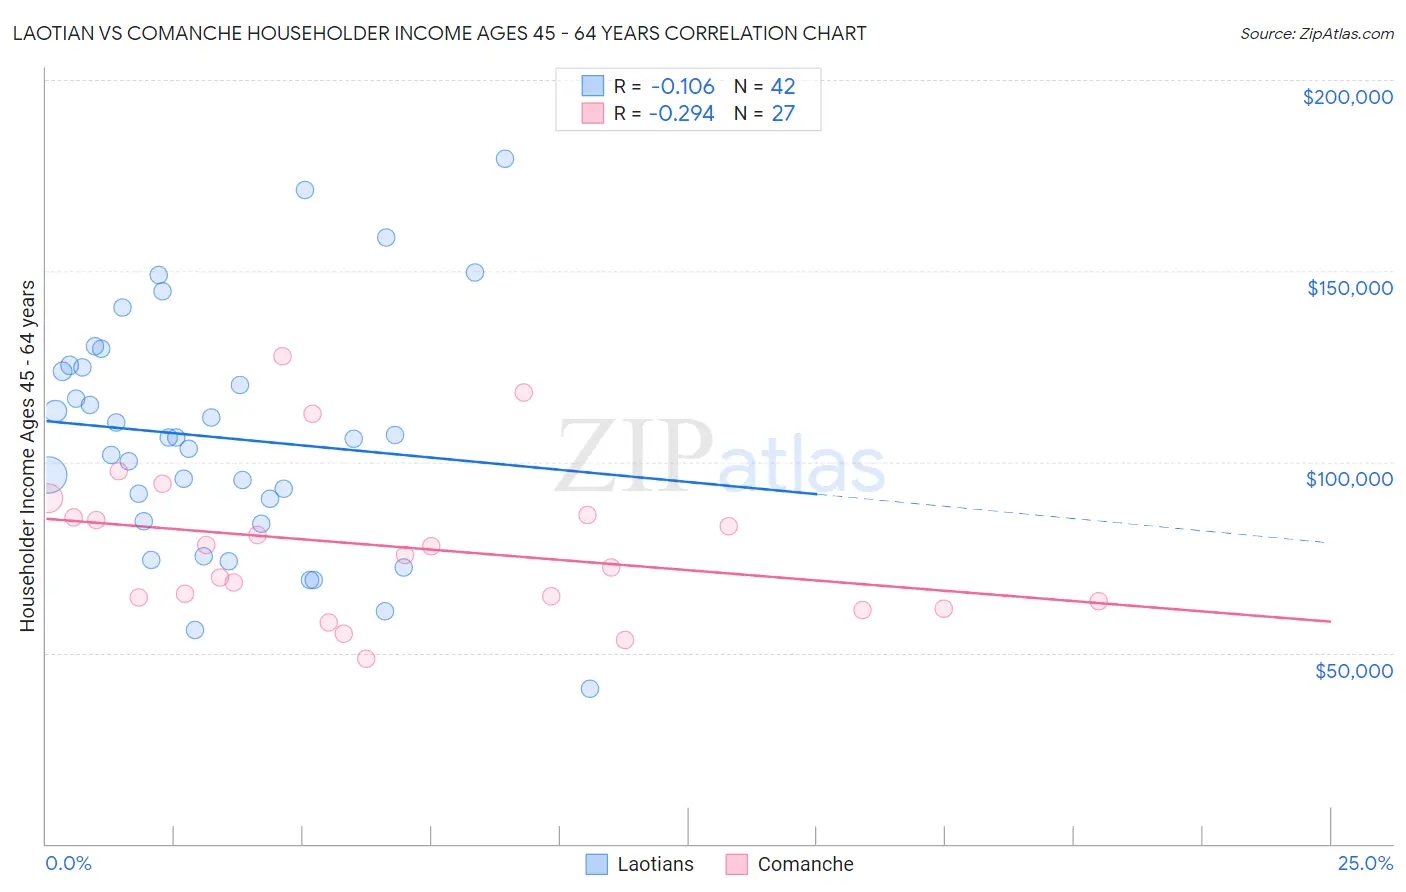 Laotian vs Comanche Householder Income Ages 45 - 64 years